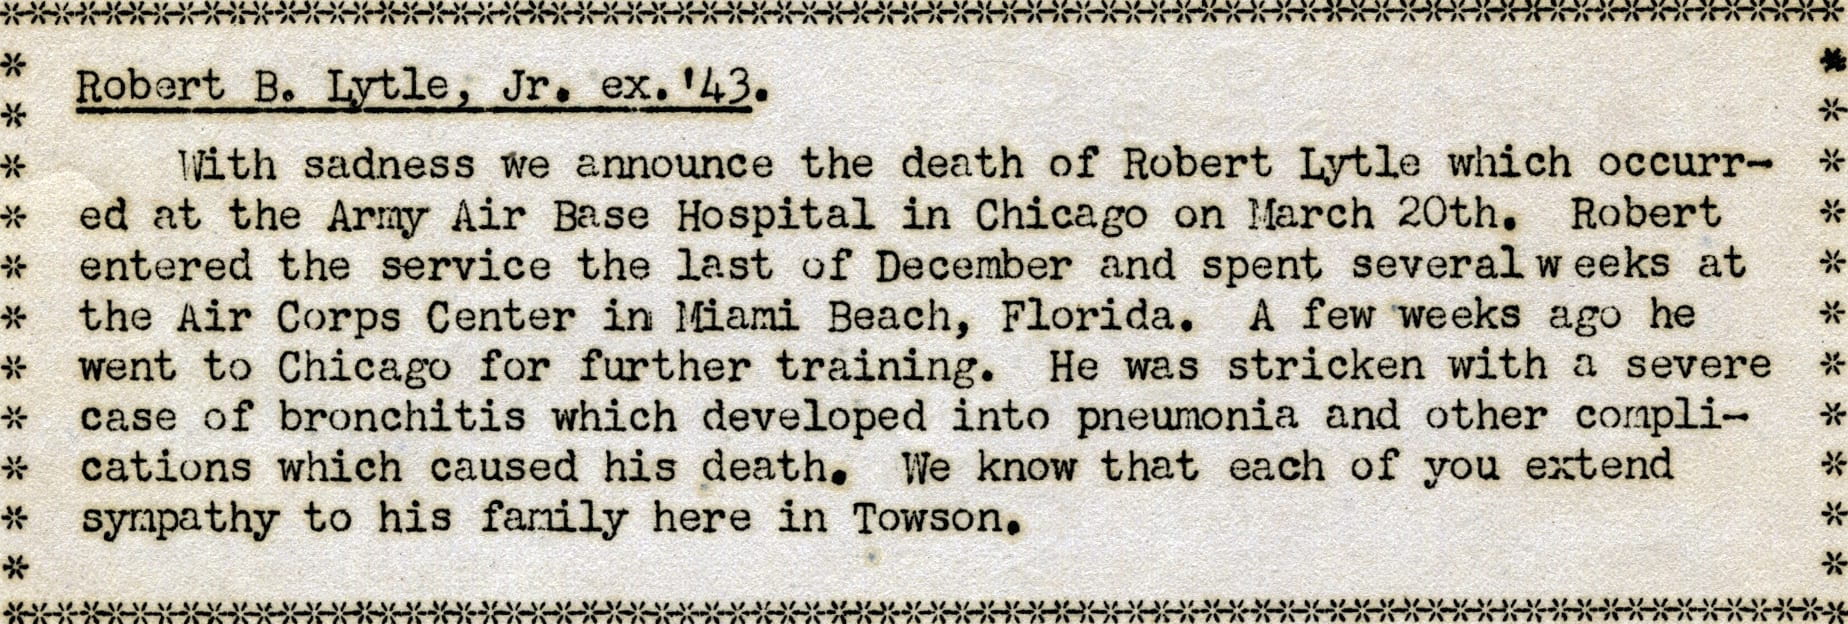 Text from STC Alumni Newsletter, March 1943. Robert B. Lytle, Jr. ex. '43. With sadness we announce the death of Robert Lytle which occurred at the Army Air Base Hospital in Chicago on March 20th. Robert entered the service the last of December and spent several weeks at the Air Corps Center in Miami Beach, Florida. A few weeks ago he went to Chicago for further training. He was stricken with a severe case of bronchitis which developed into pneumonia and other complications which caused his death. We know that each of you extend sympathy to his family here in Towson.